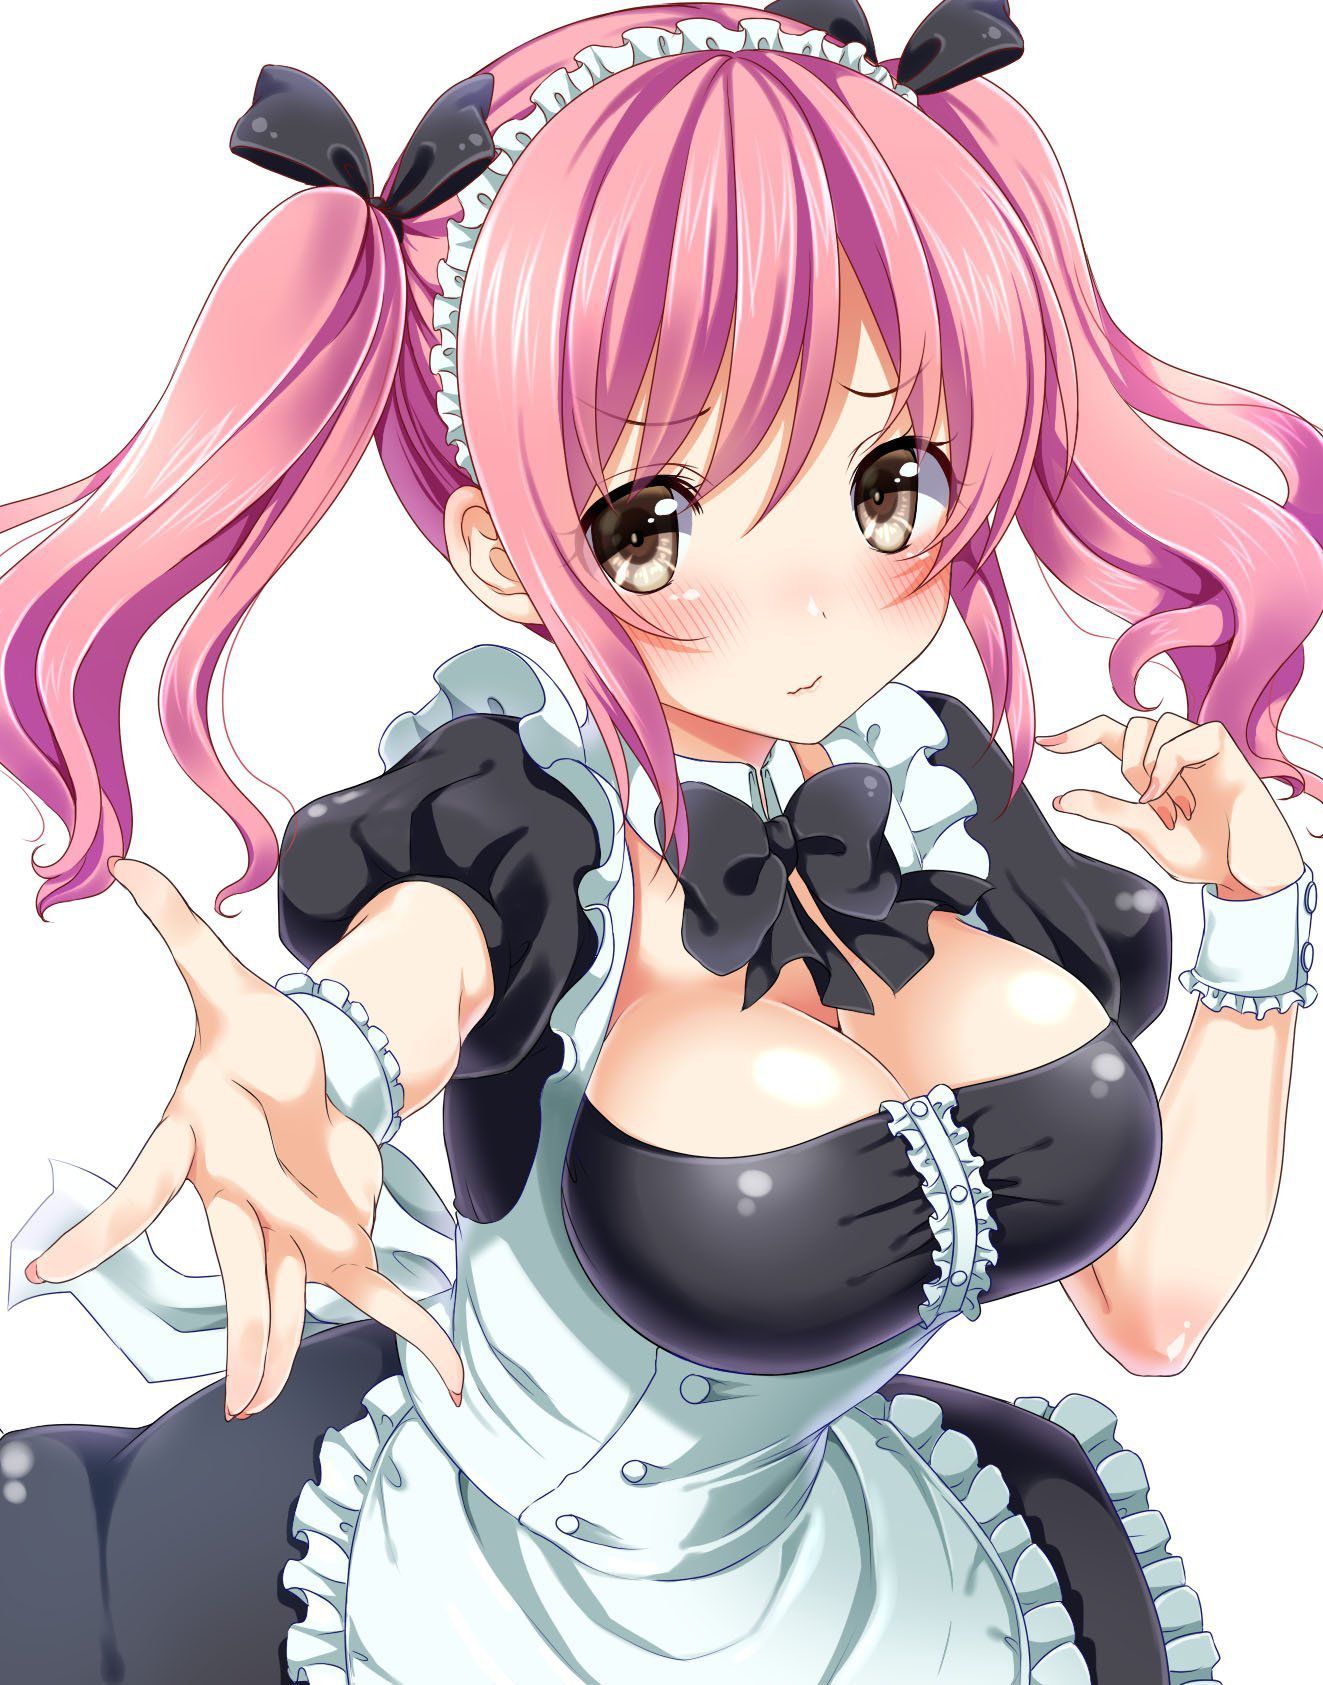 Why do girls in maid clothes look so sexual? 7